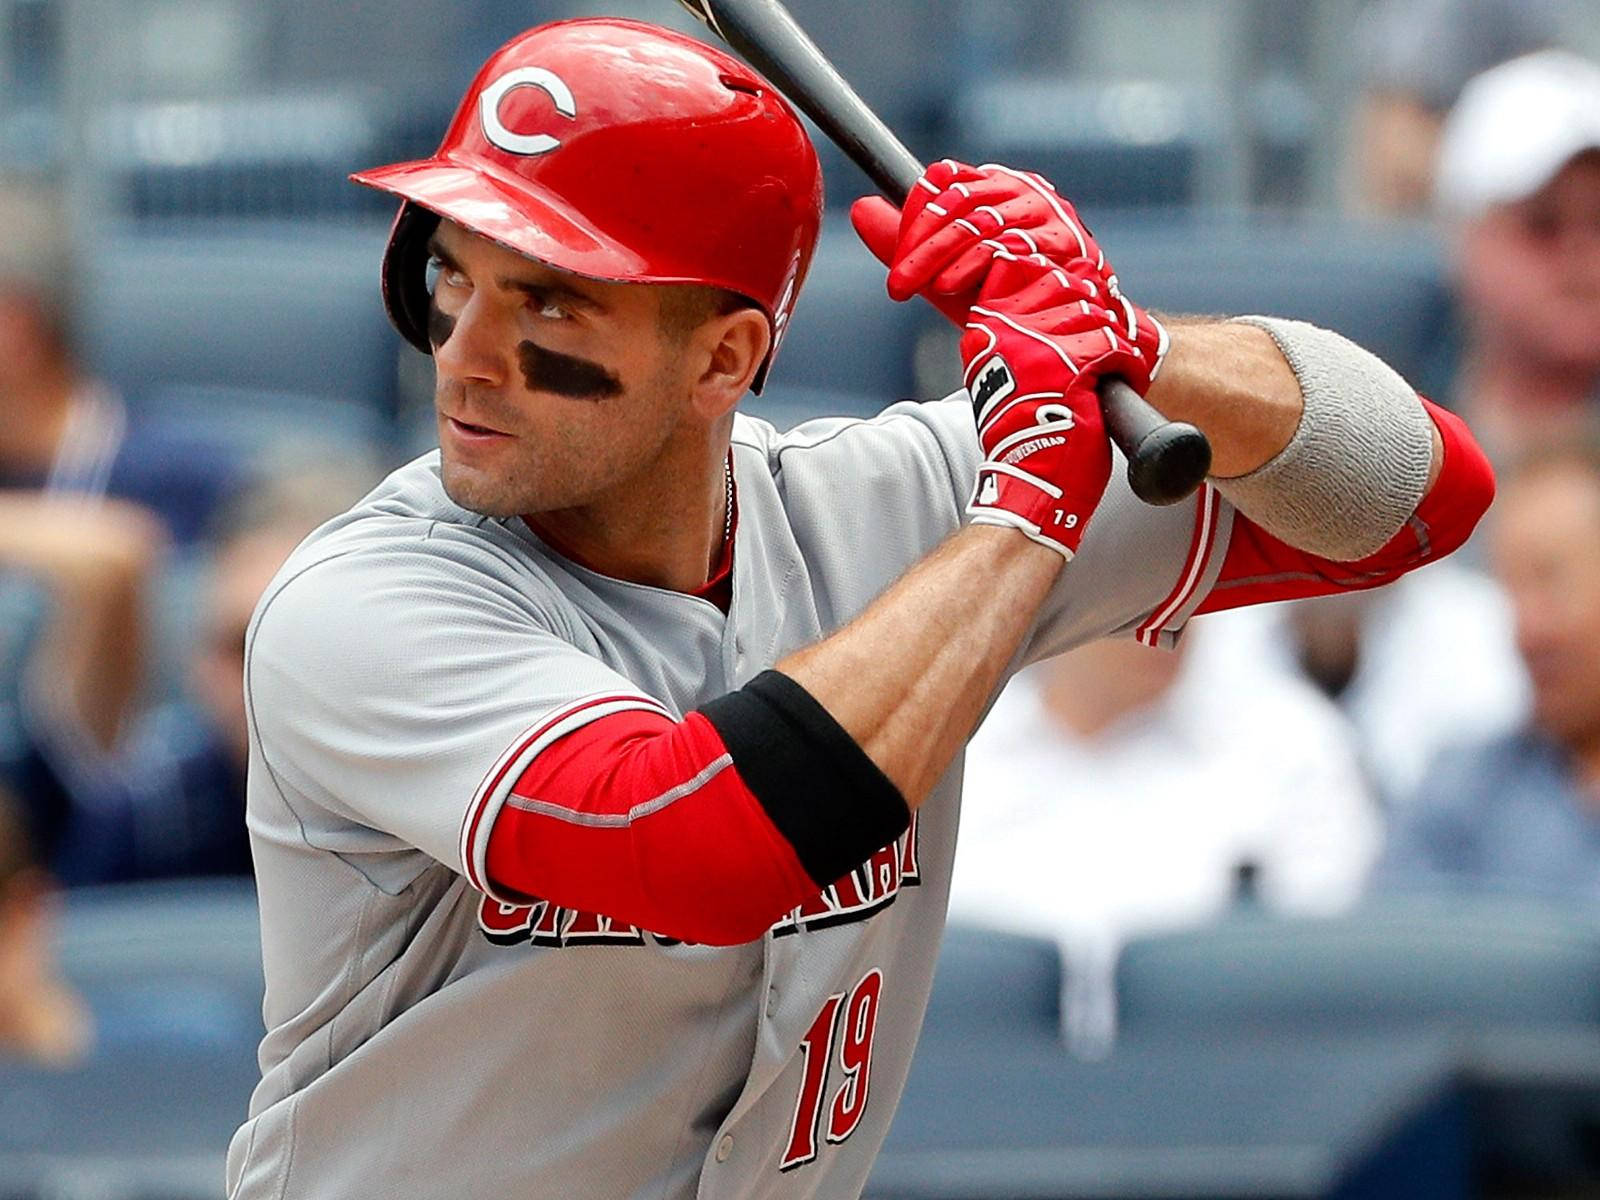 Download Joey Votto With Grunge Backdrop Wallpaper